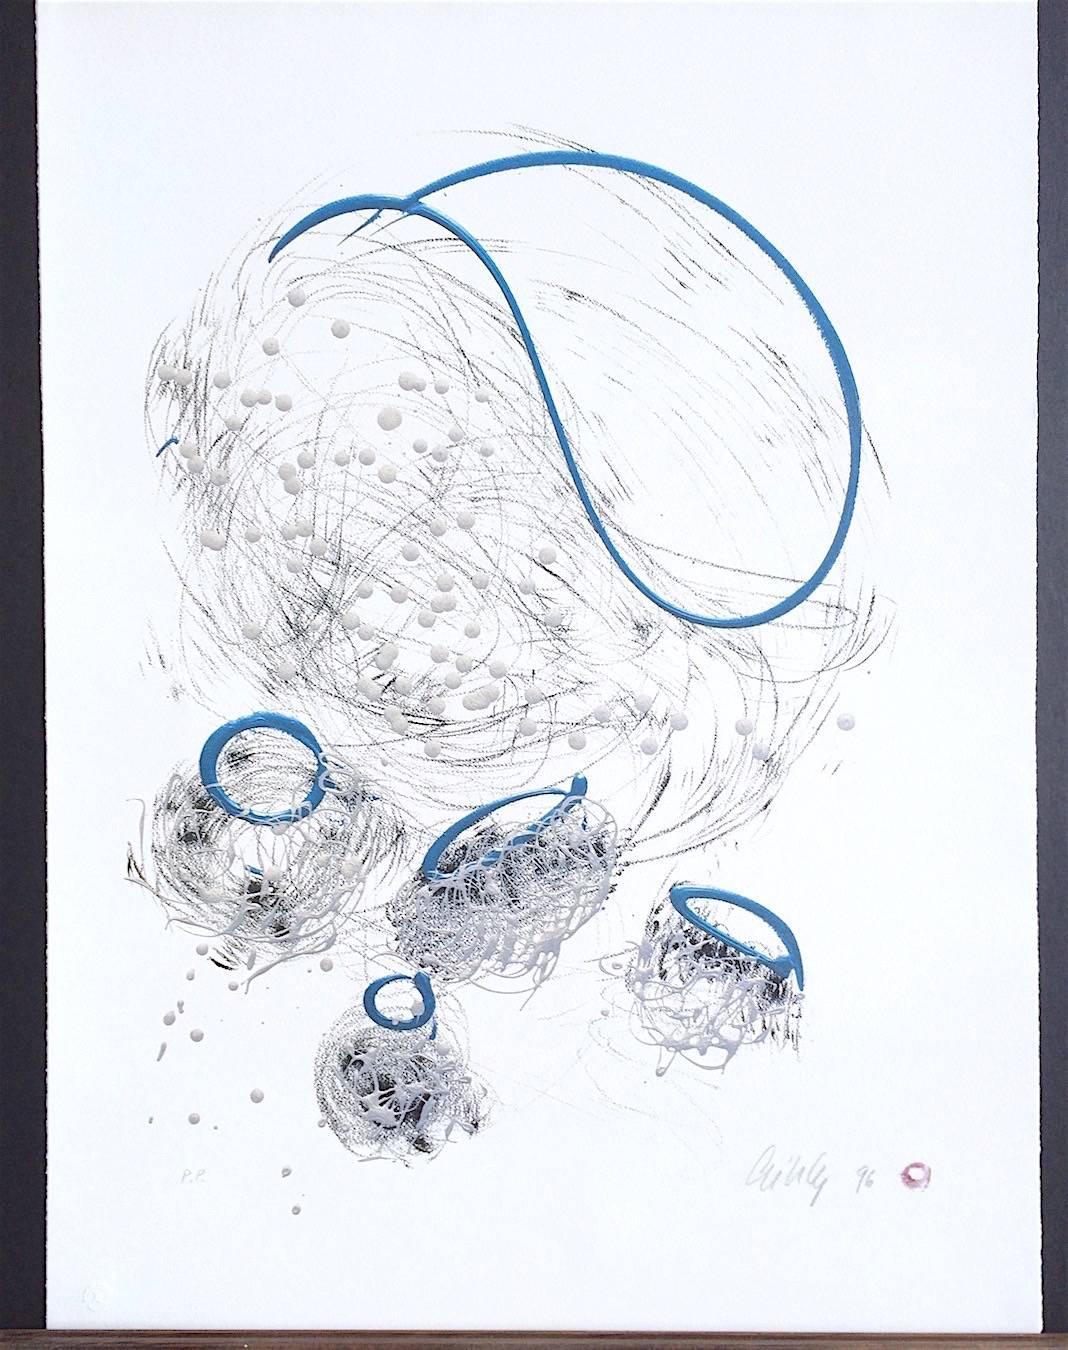 dale chihuly basket drawing